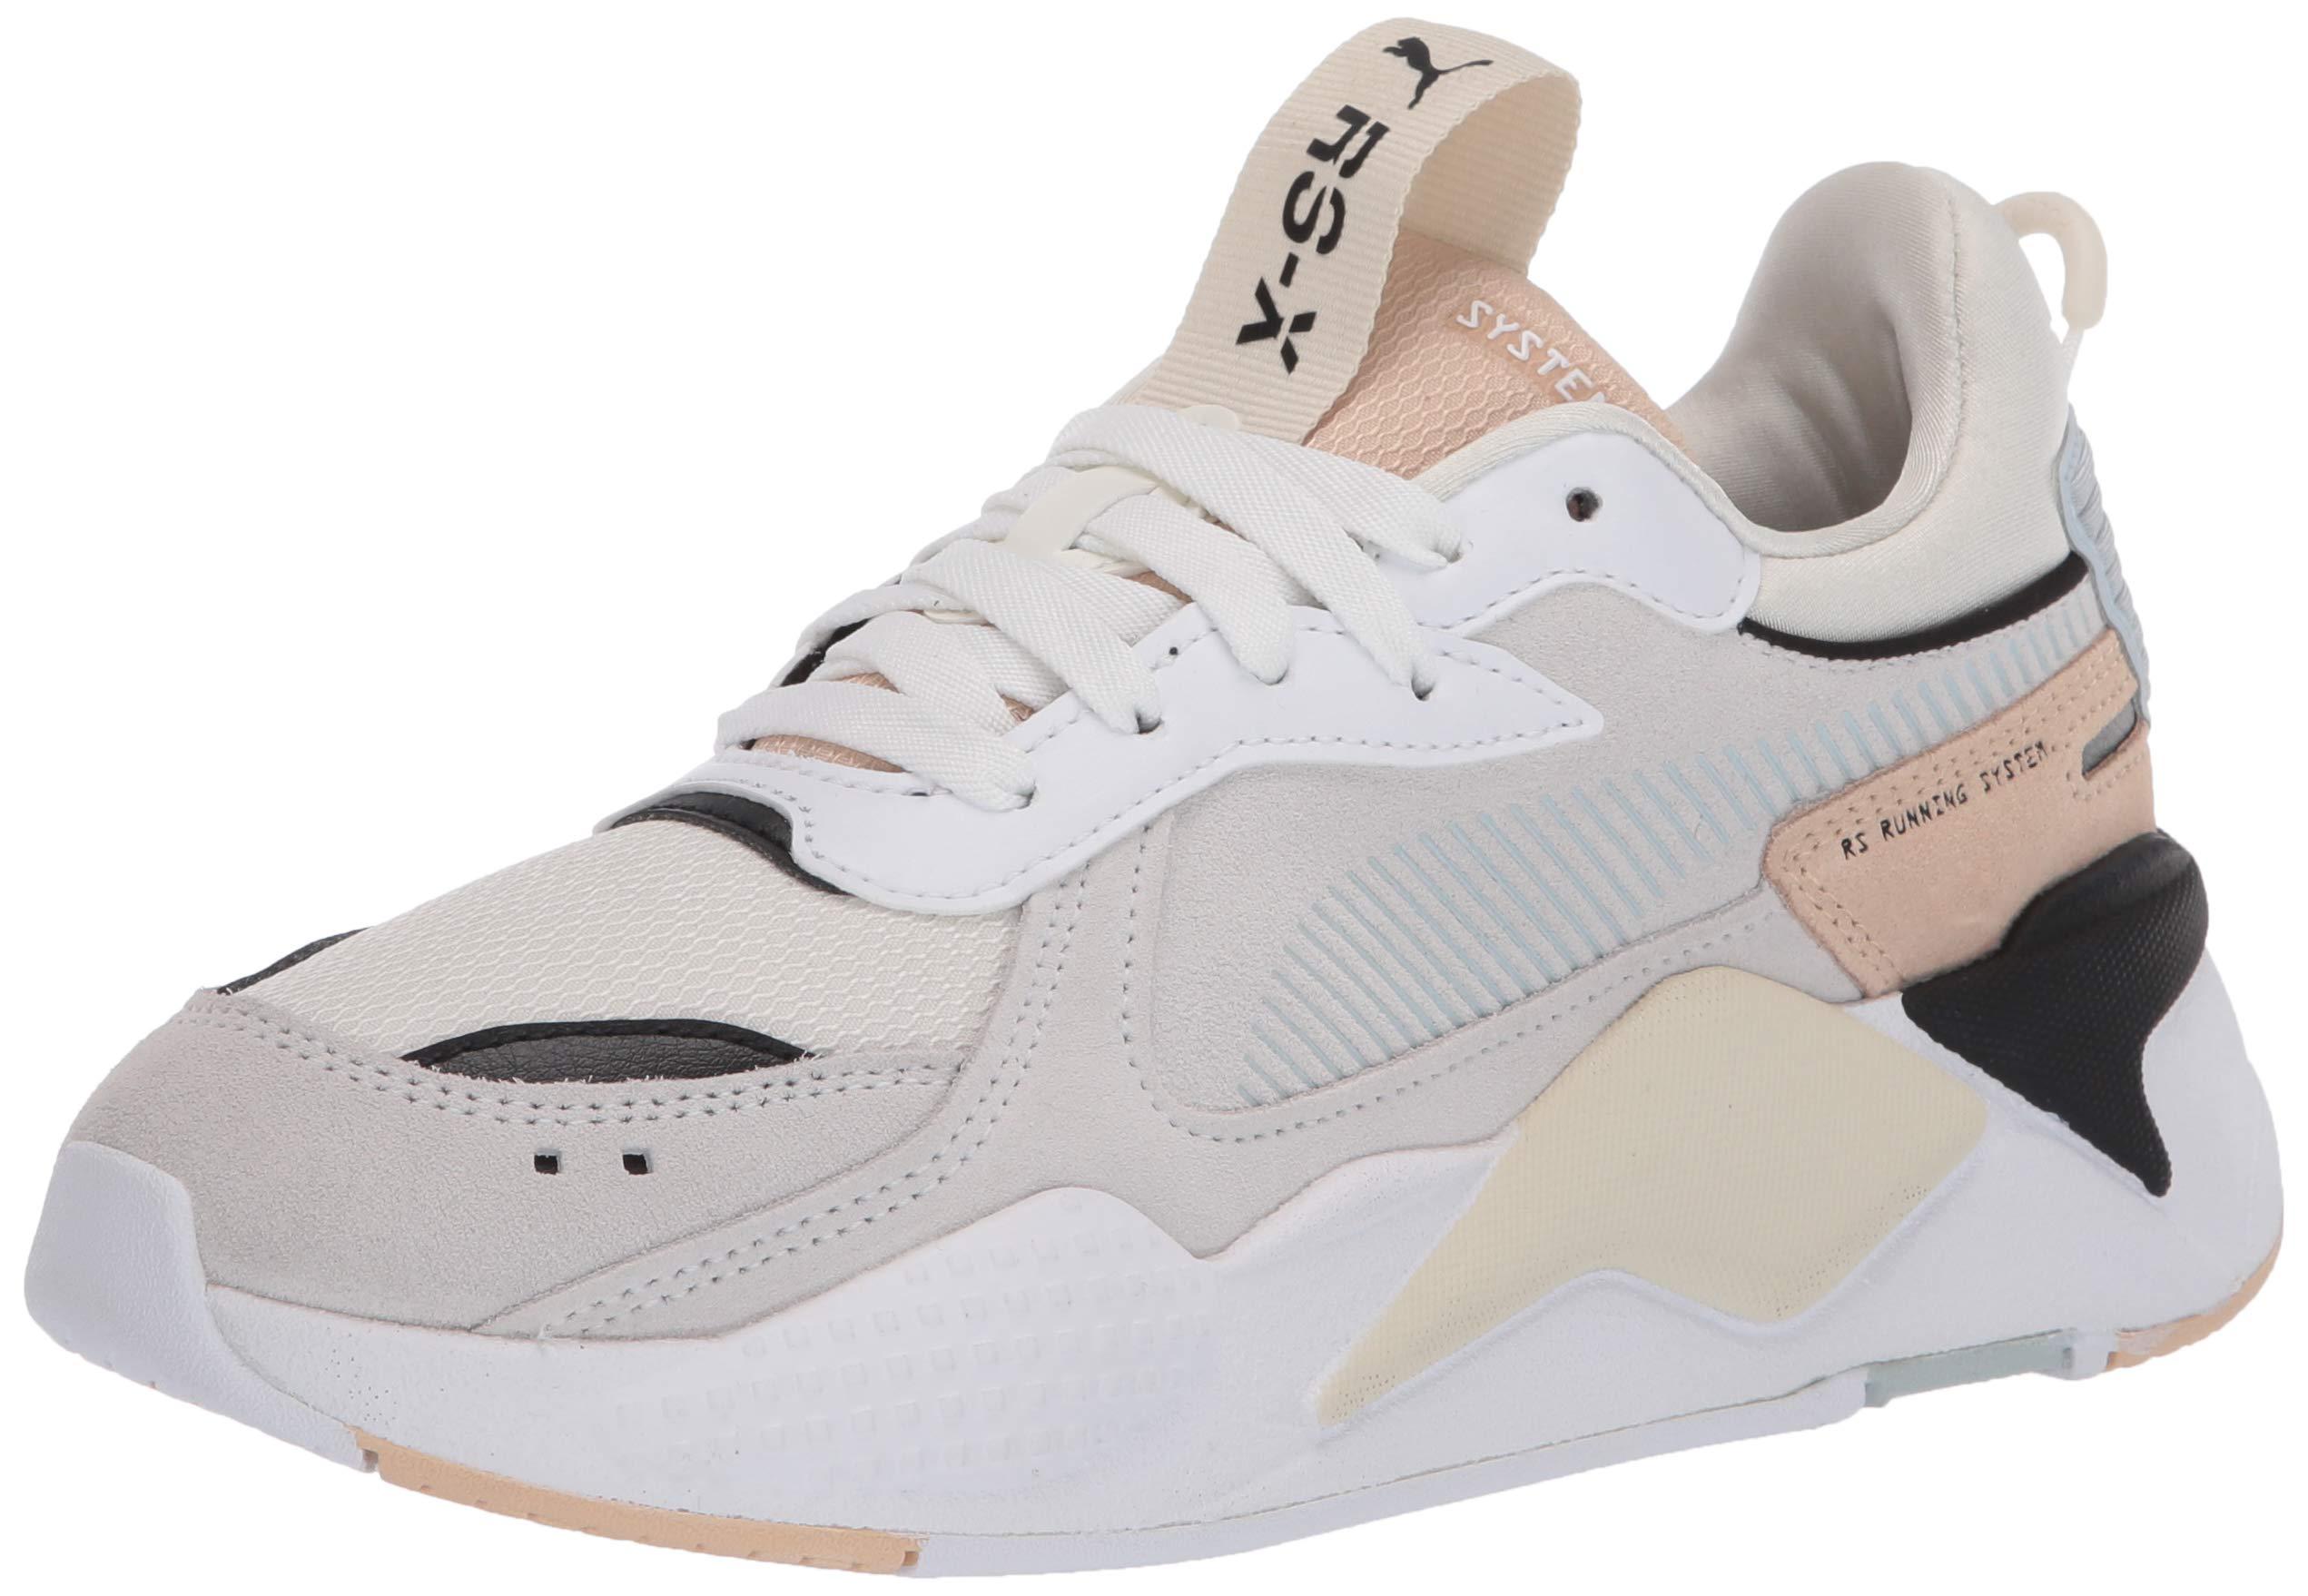 PUMA Suede White & Beige Rs-x Reinvent Trainers | Lyst